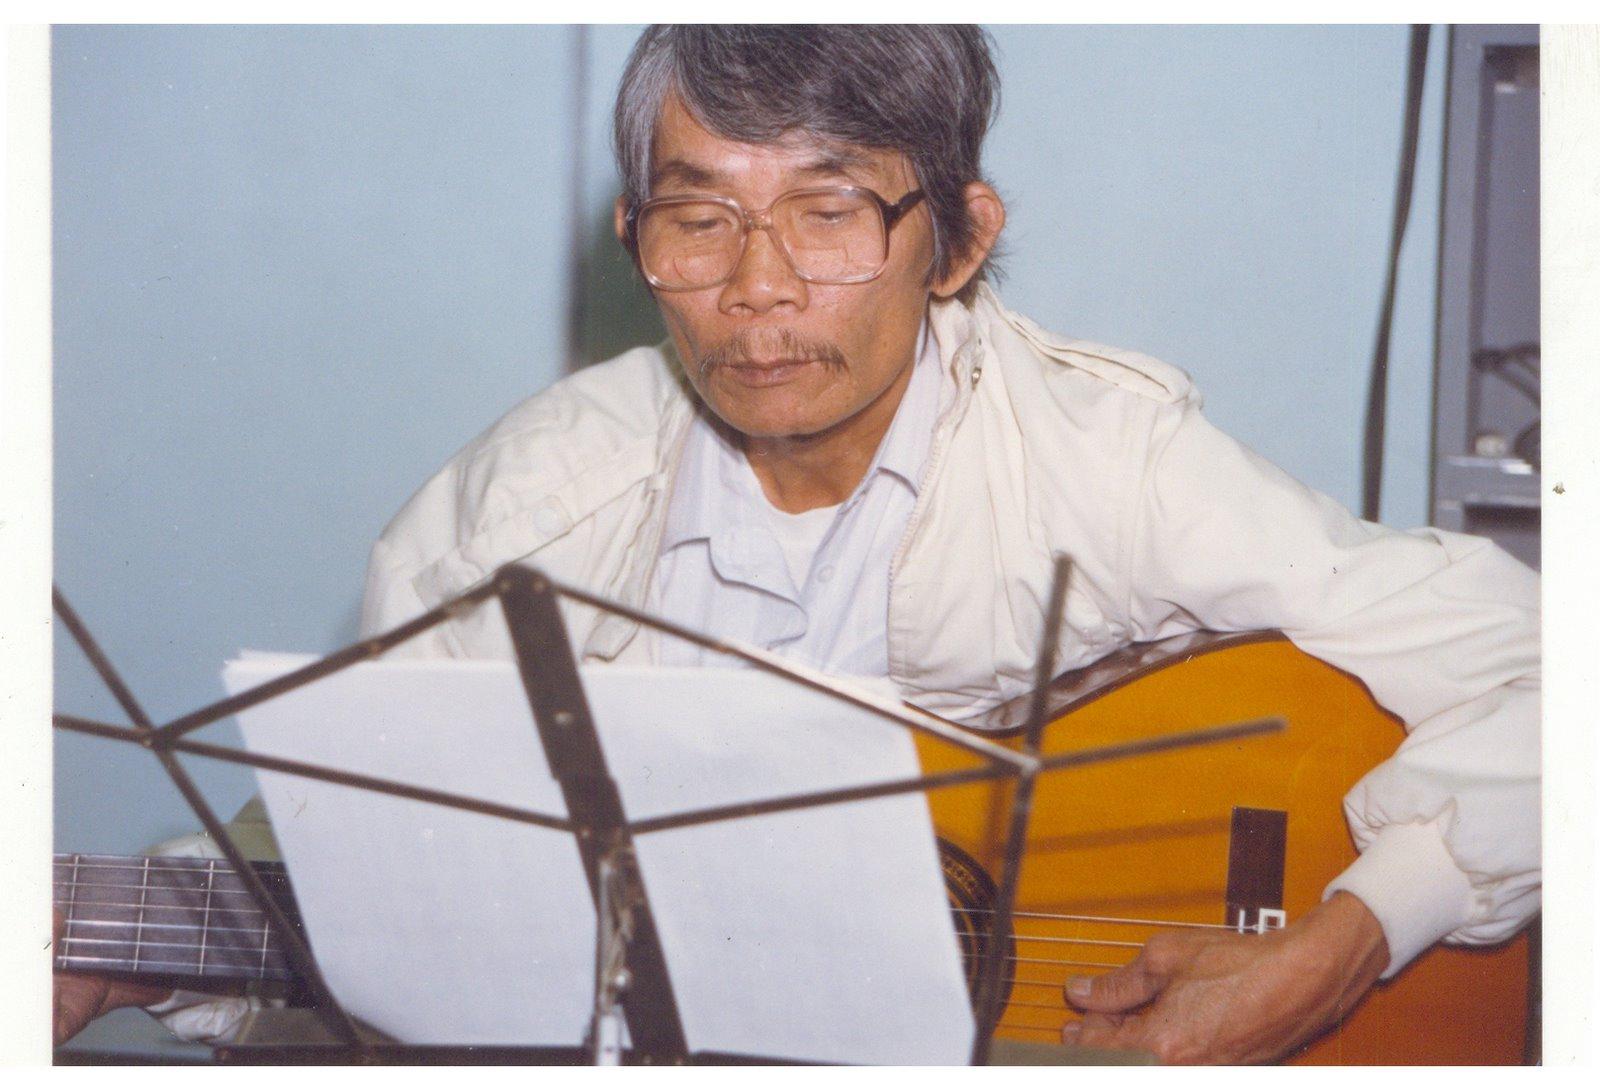  Picture of musician Tram Tu Thieng playing the guitar